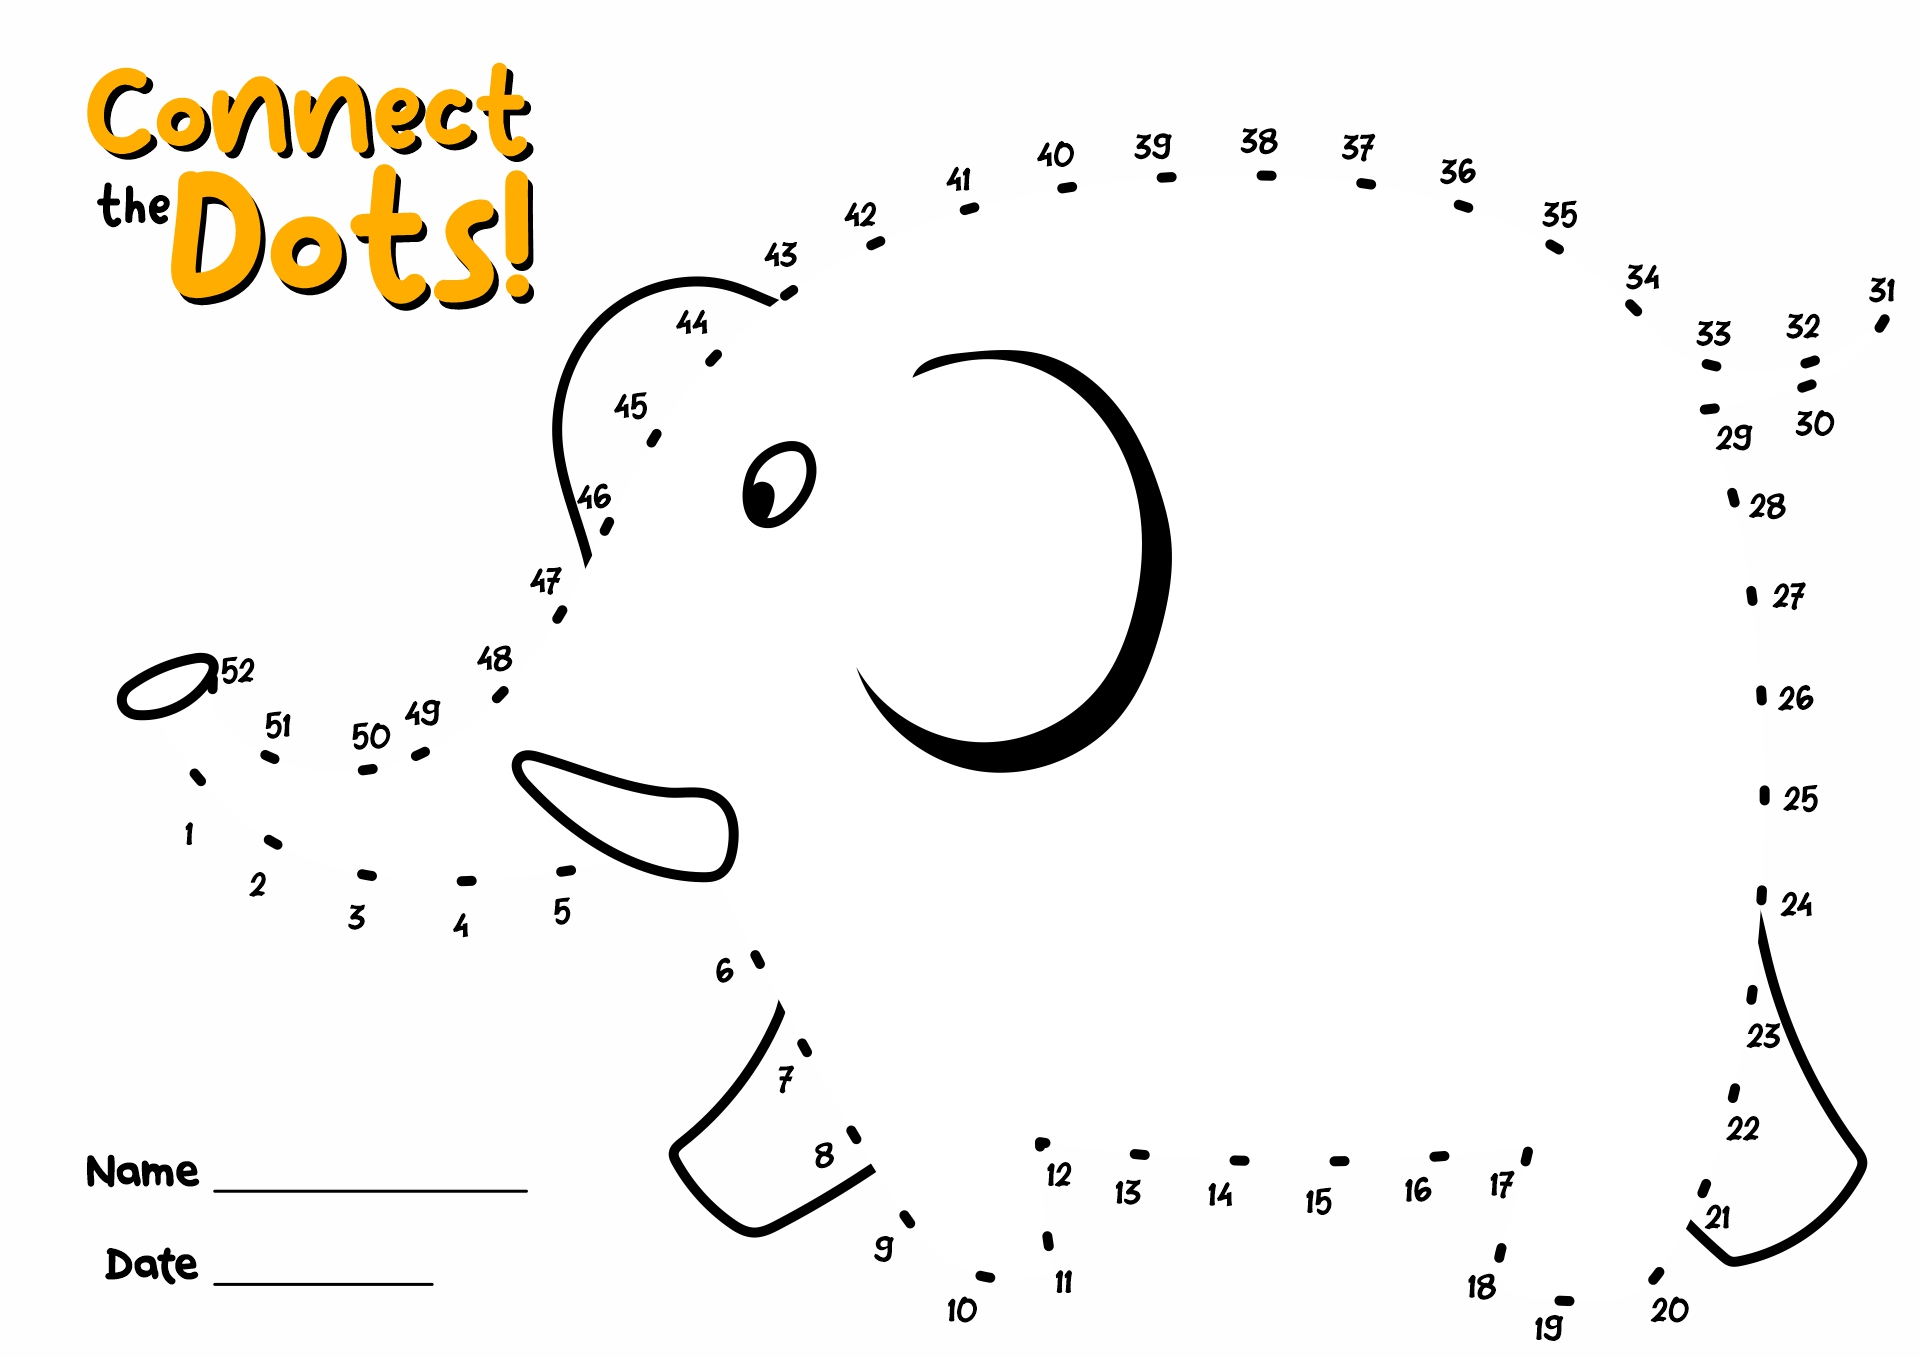 Connect the Dots Number Worksheets Image